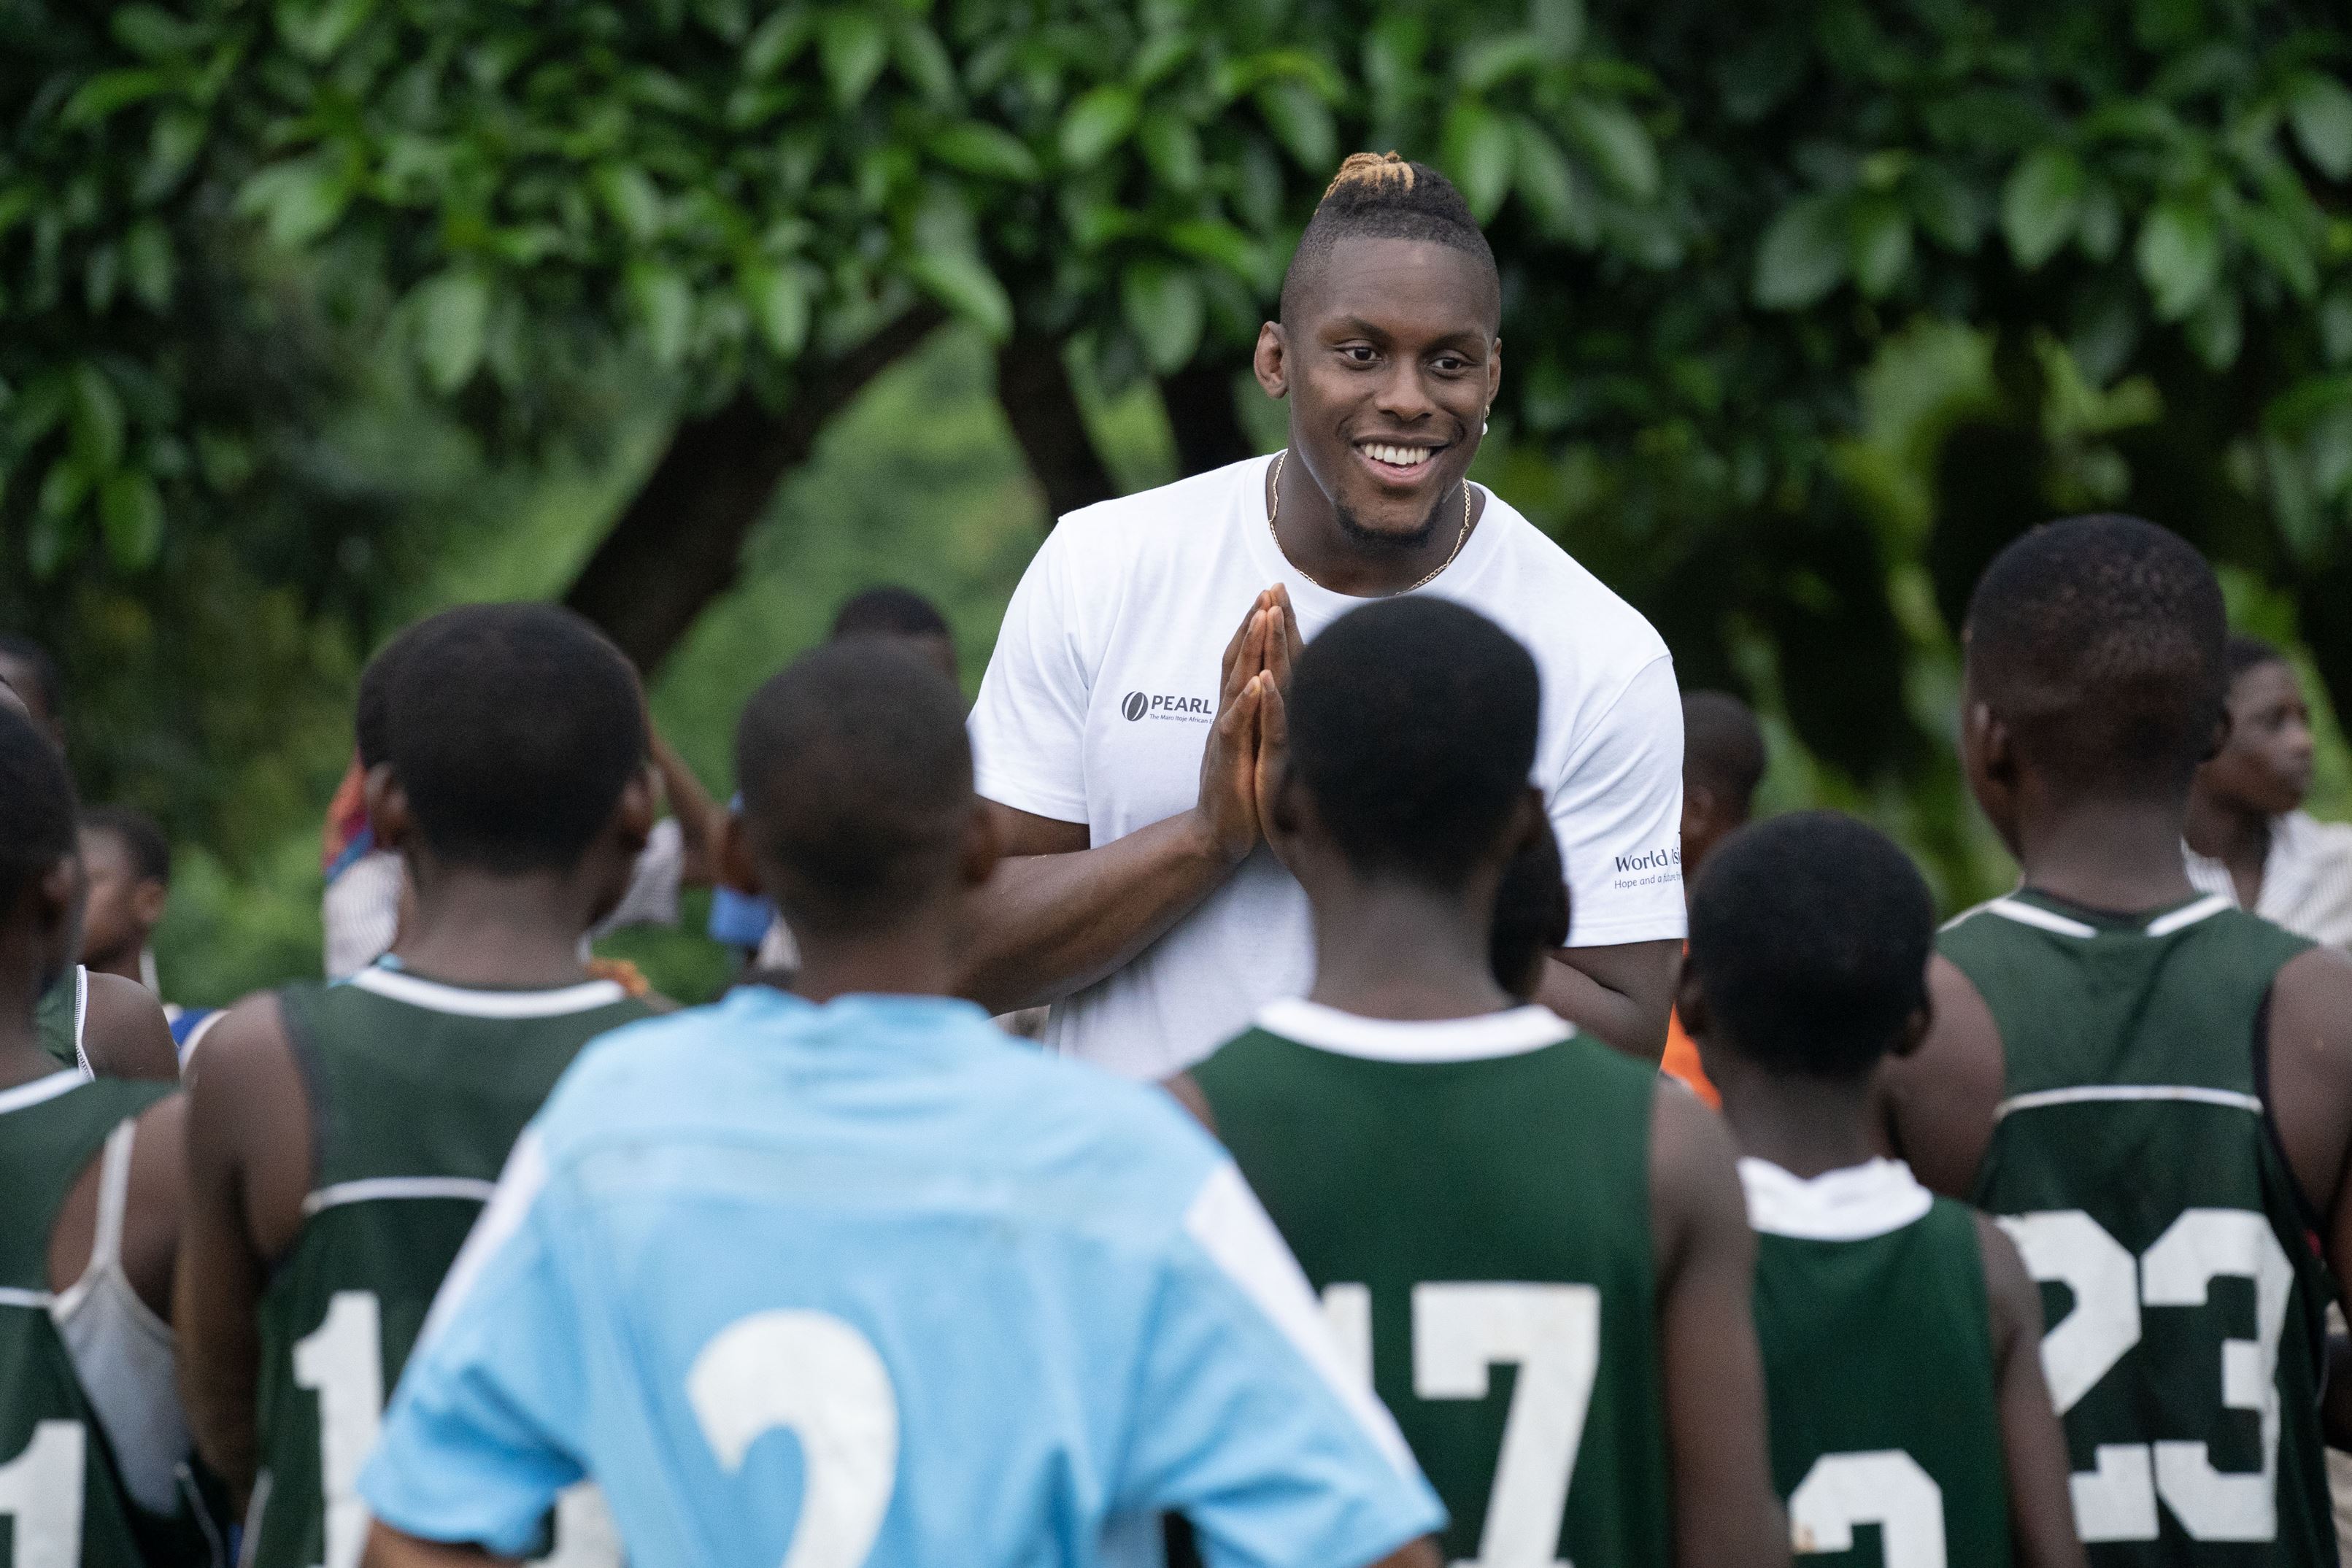 Maro Itoje cheers on young students participating in a rugby session. As the students face Maro, he smiles and encourages them. 